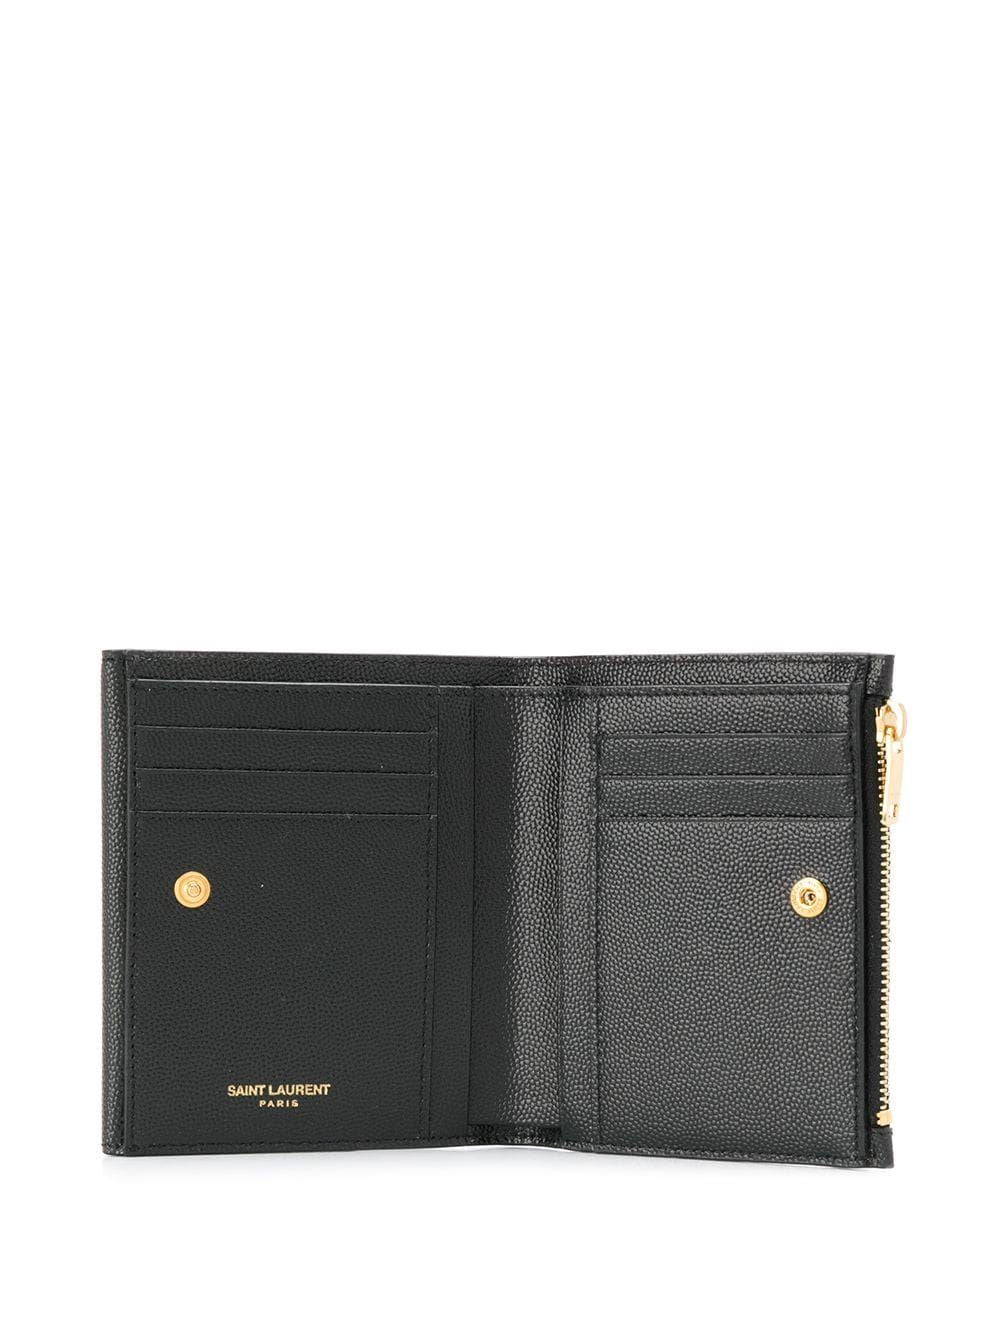 Elegant Black Compact Wallet for Women in High-Quality Calfskin Leather